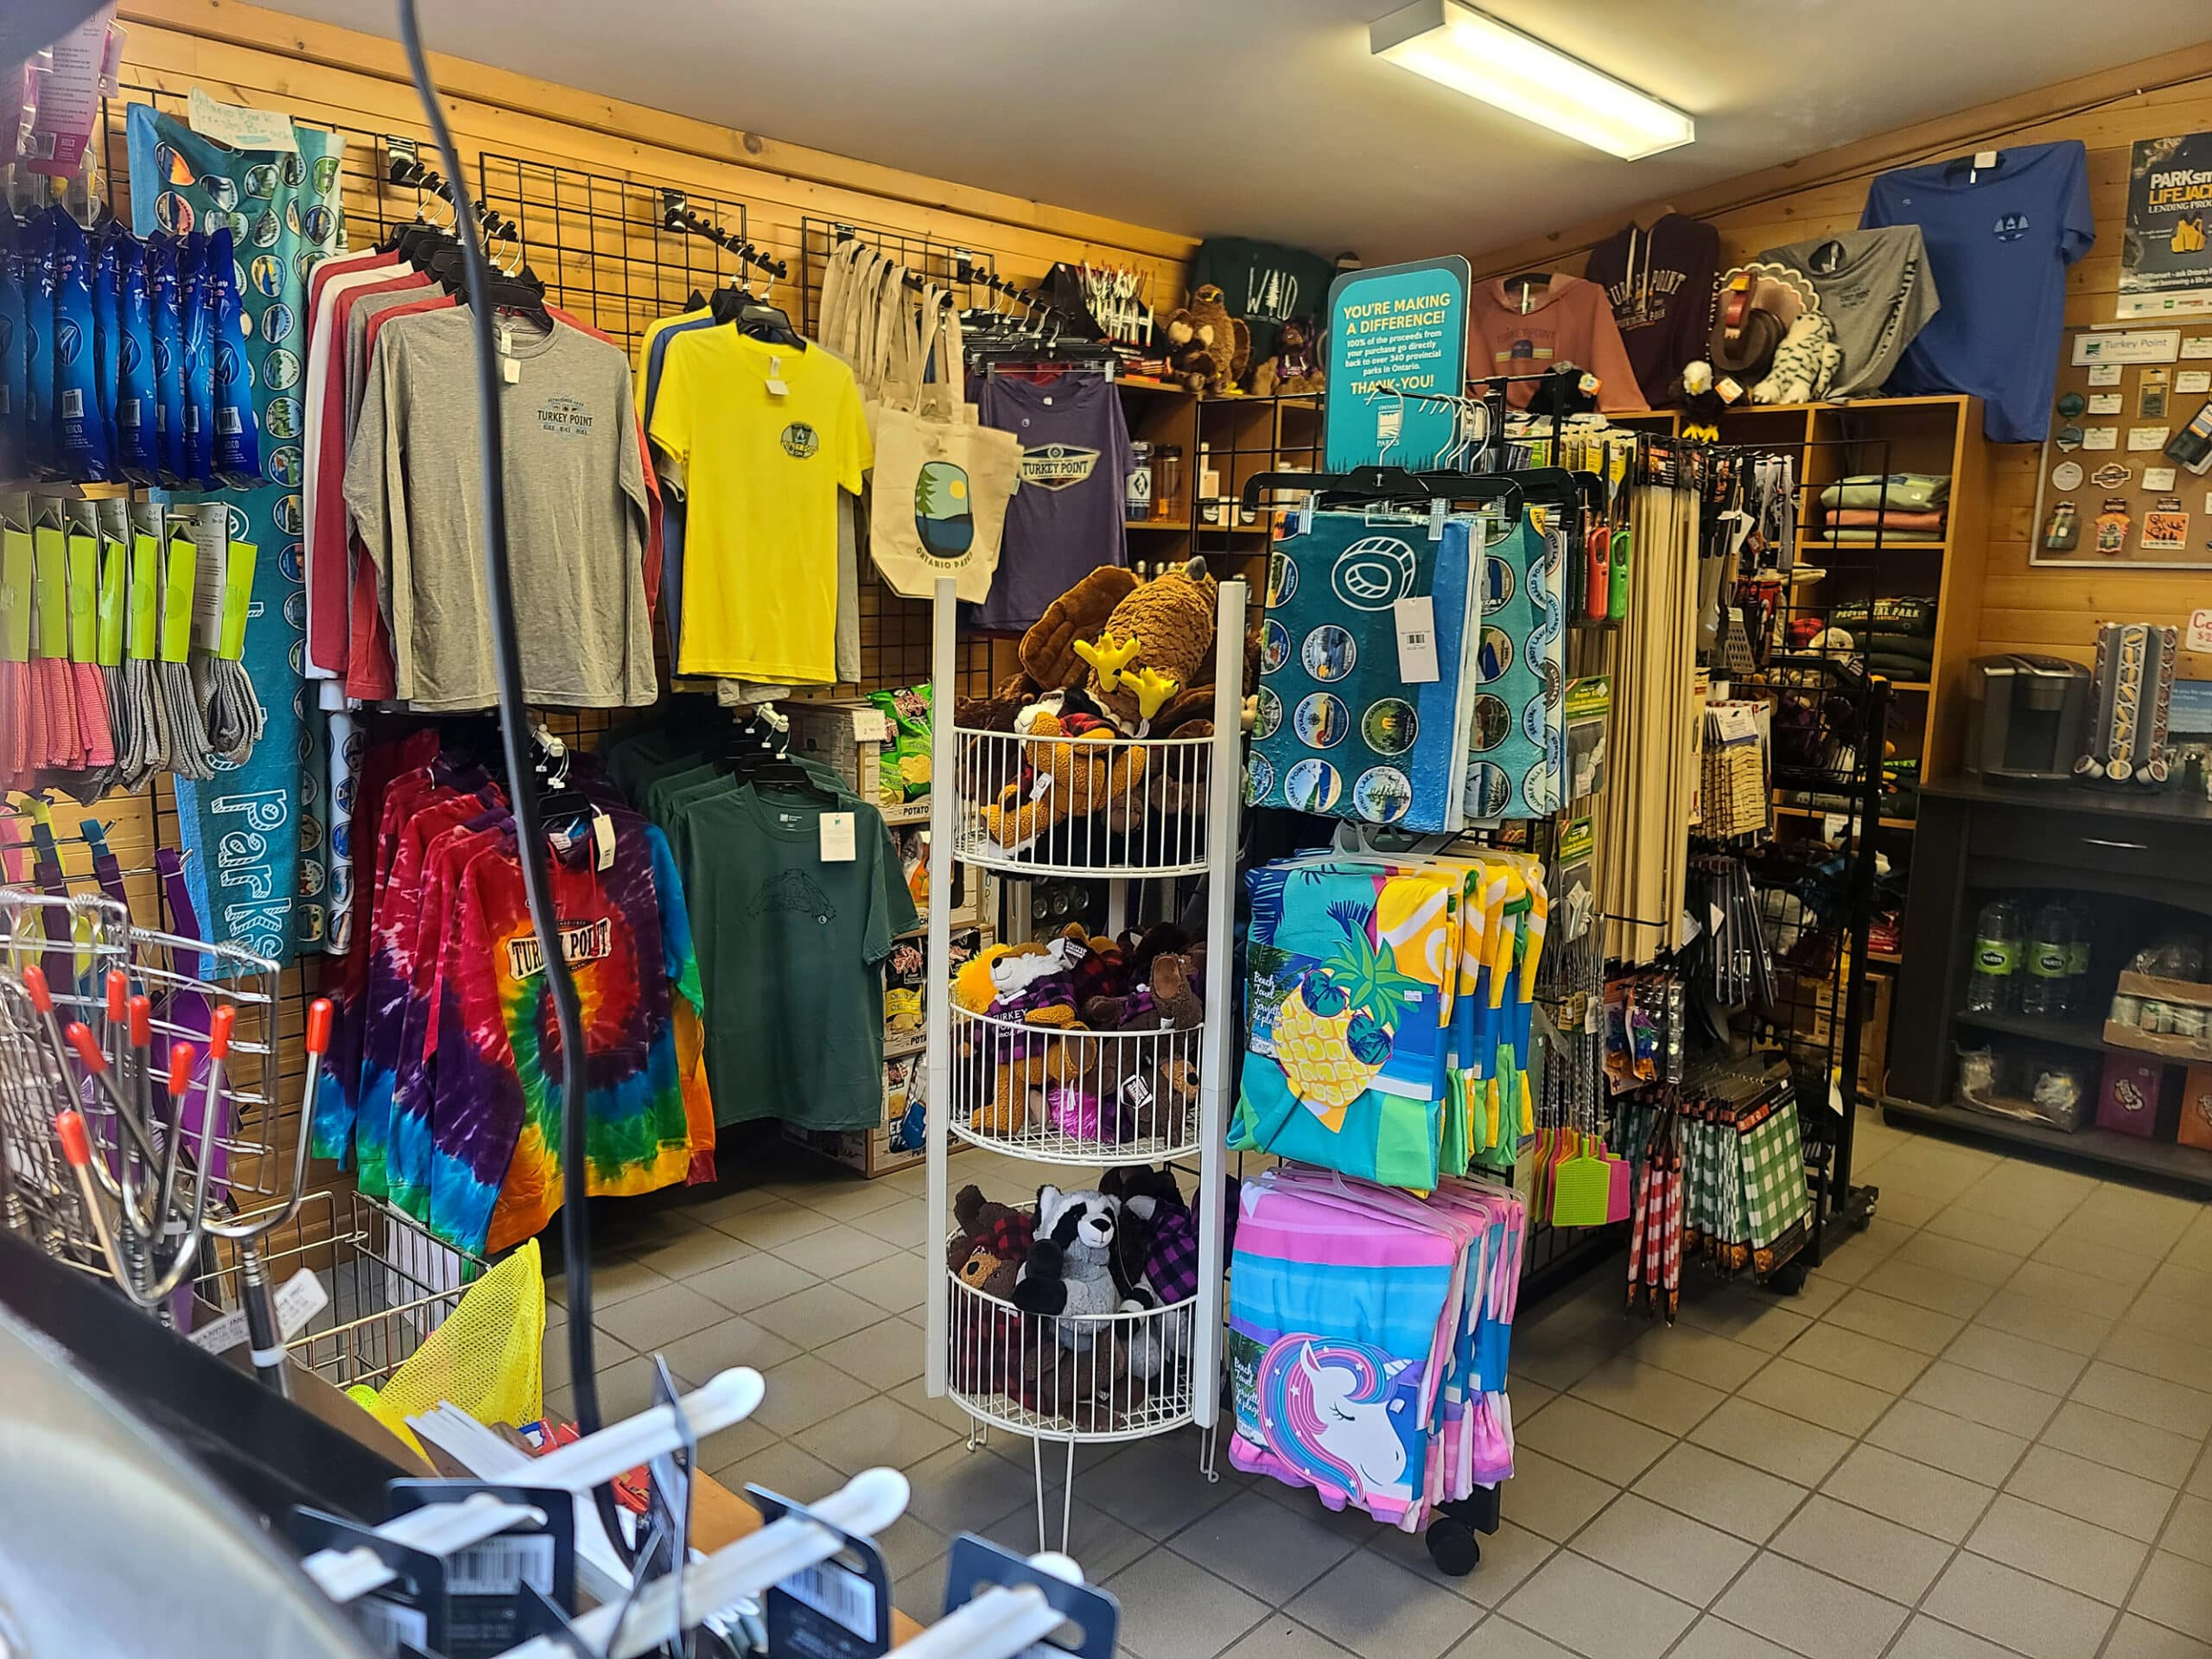 The inside of a campground store, with racks of shirts and souvenirs visible.